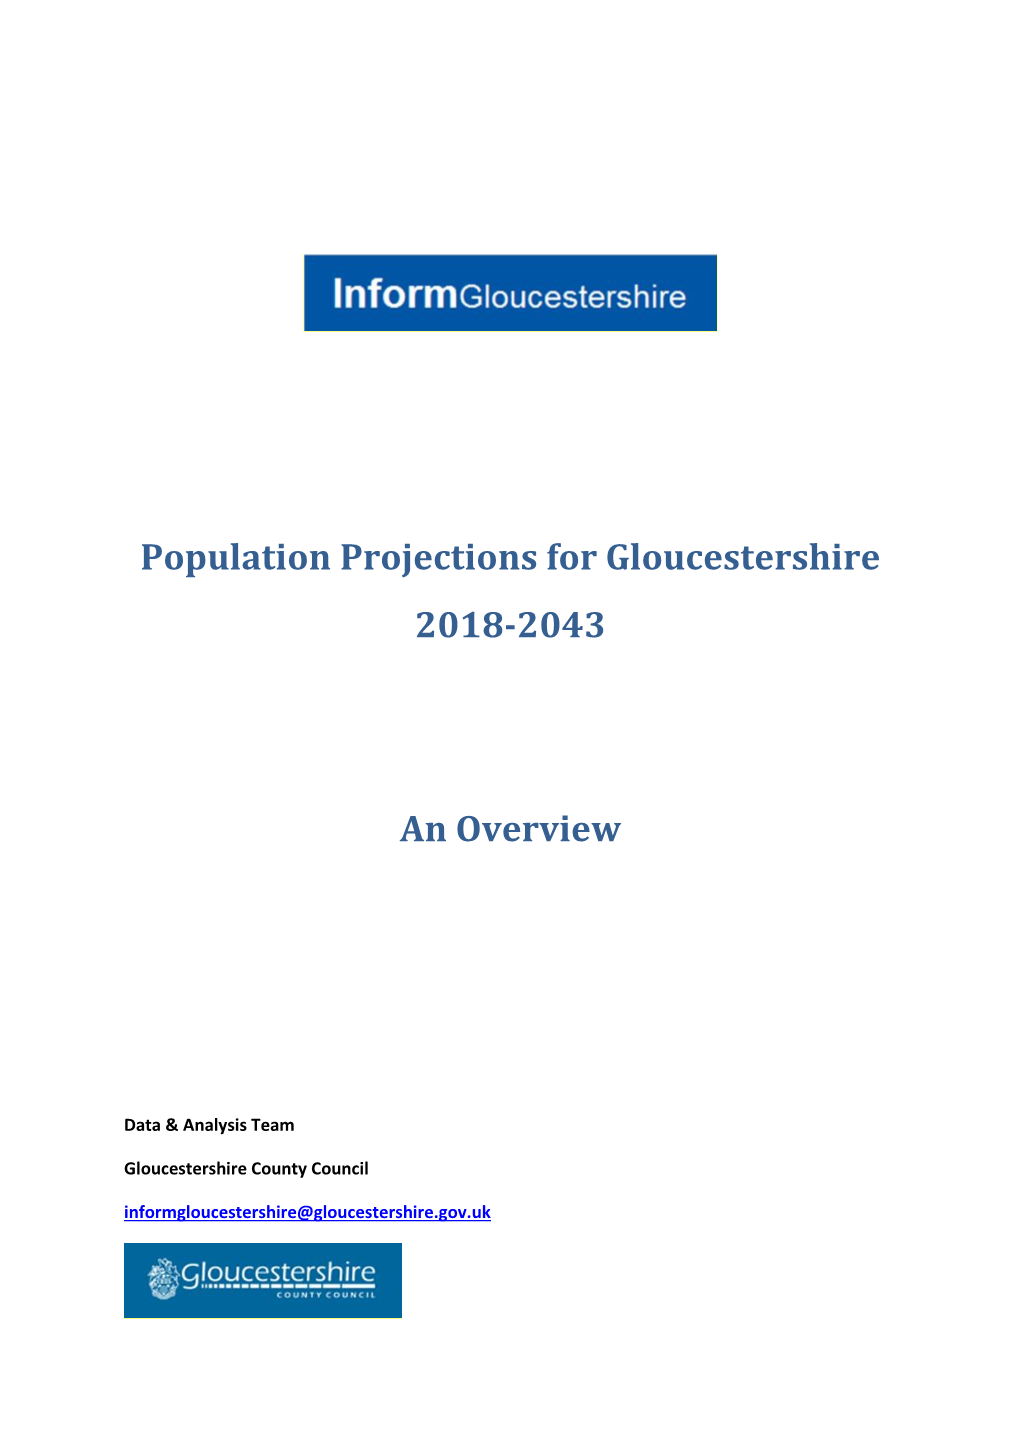 Population Projections for Gloucestershire 2018-2043